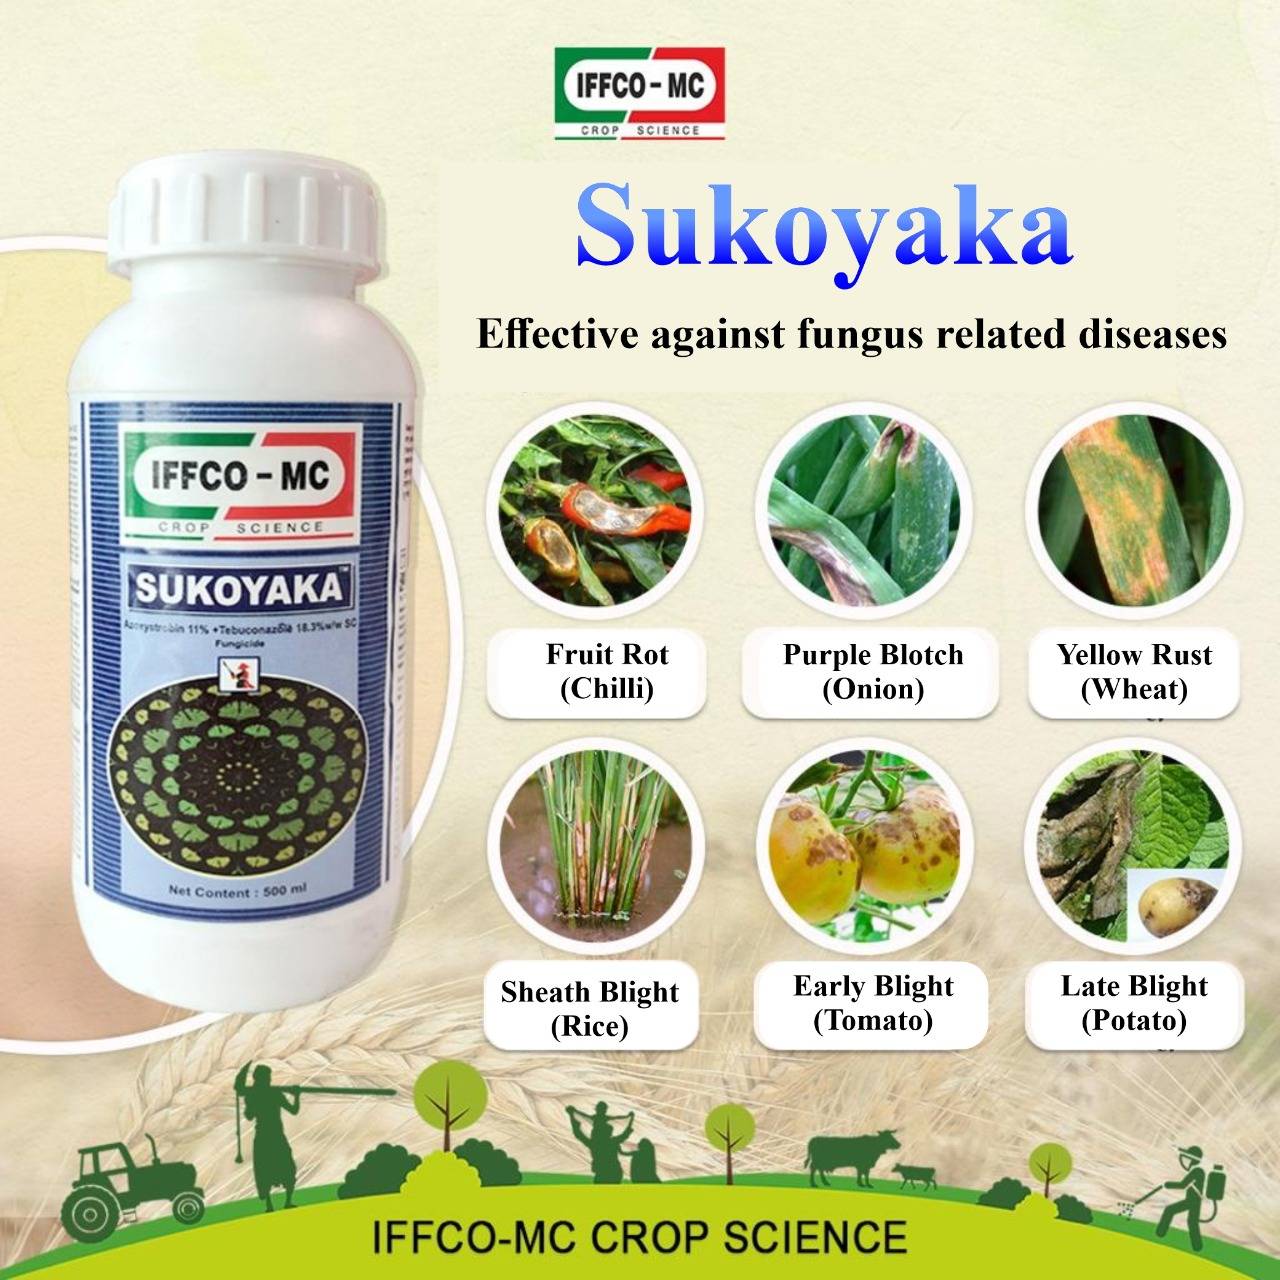 A broad spectrum fungicide Sukoyaka, a joint venture of IFFCO and Mitsubishi Corporation.